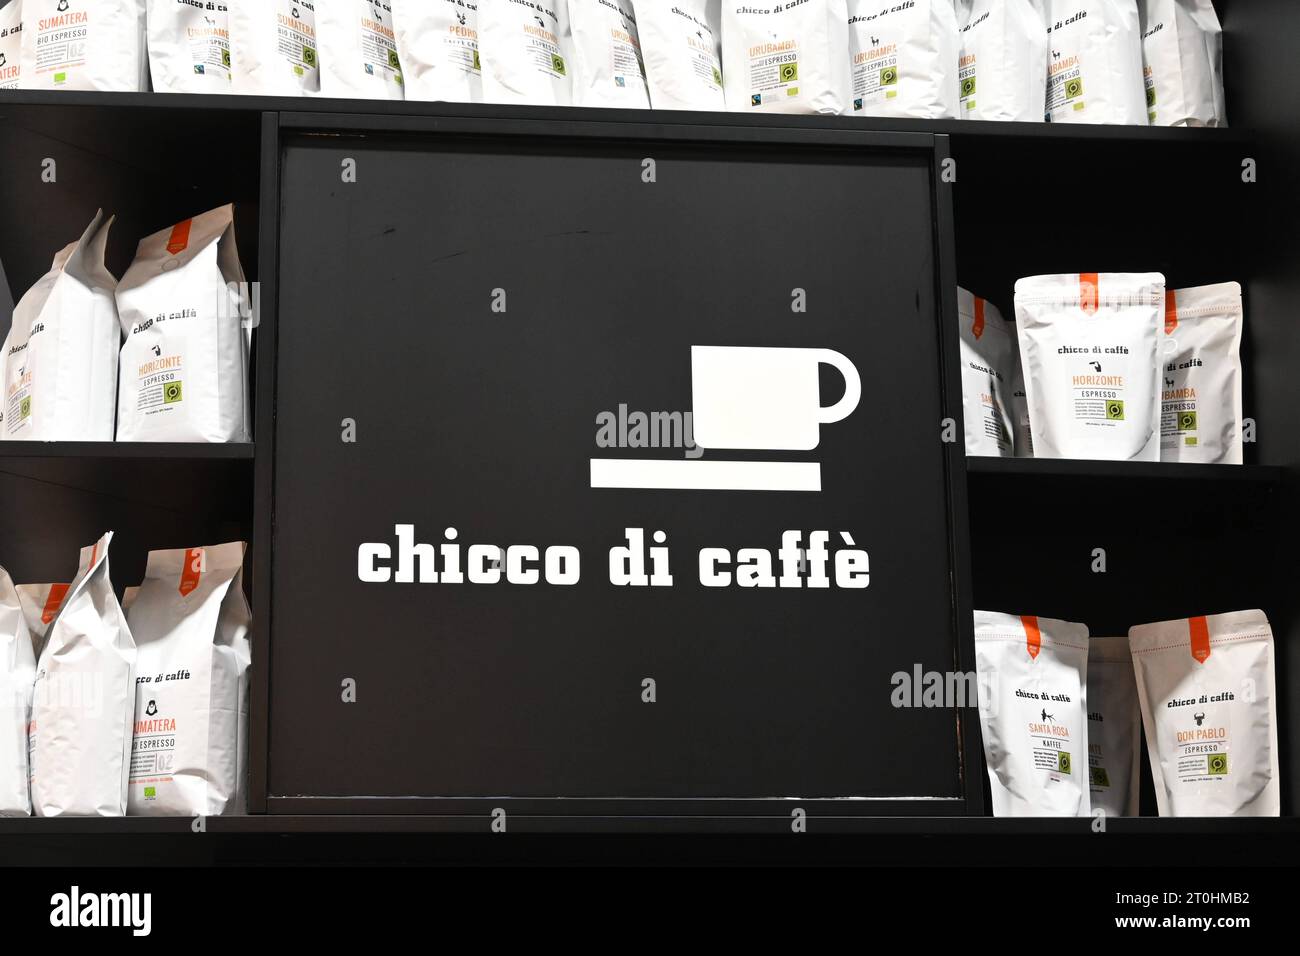 Die Kaffeebar und Rösterei Chicco di caffe hat ihren Firmensitz in München *** Chicco di caffe coffee bar and roastery is located in Munich, Germany Credit: Imago/Alamy Live News Stock Photo